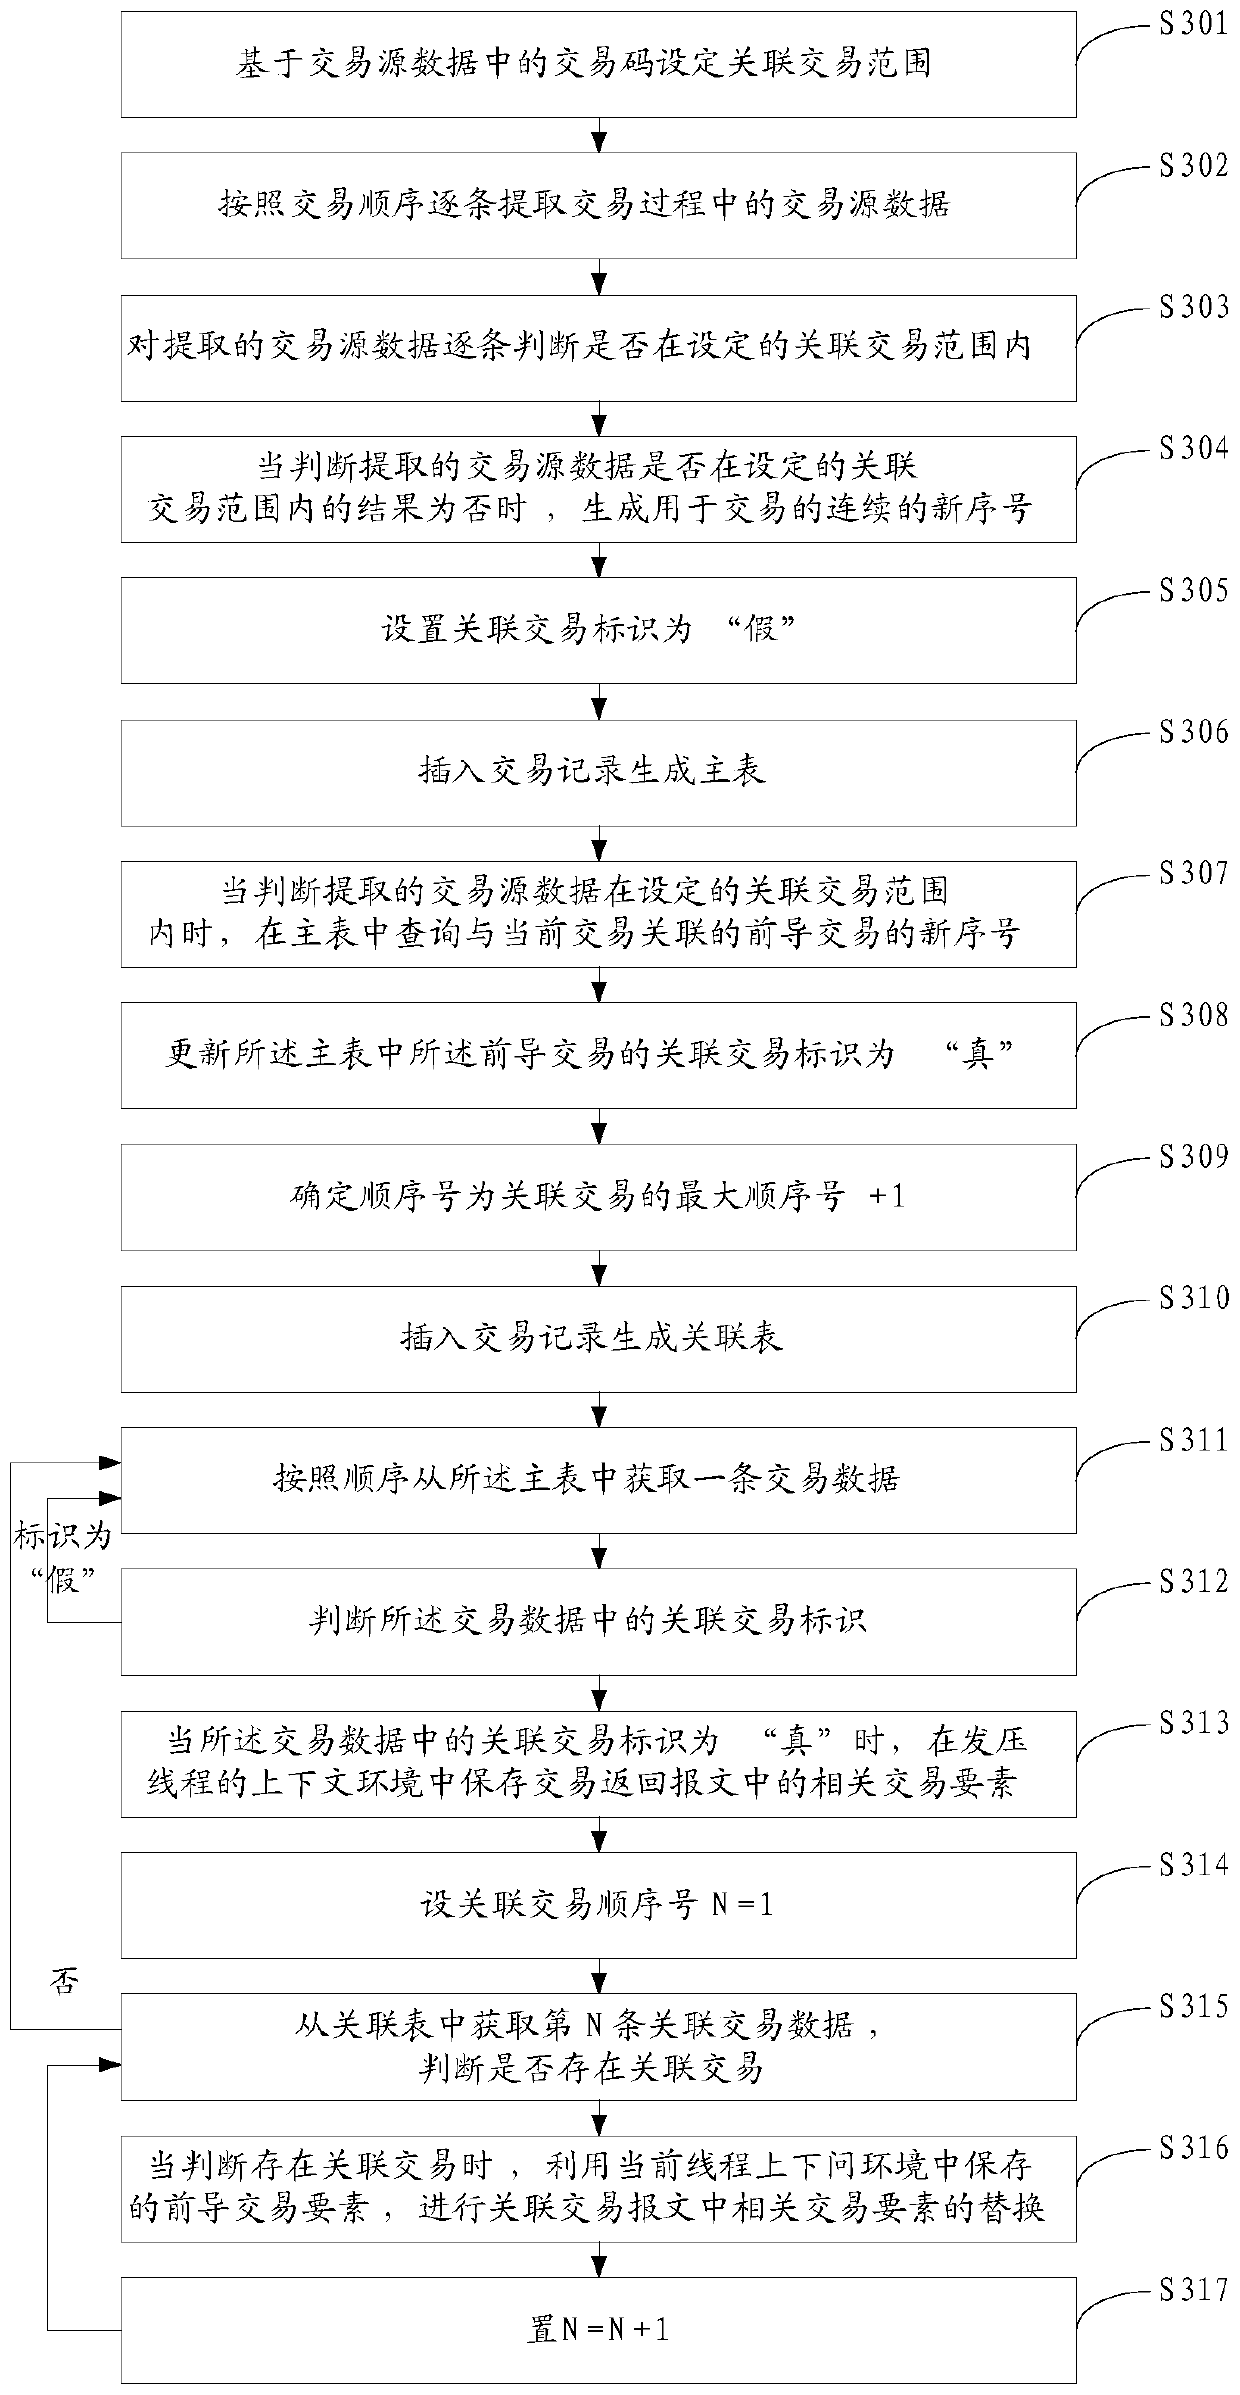 A pressure method and system for stress testing related transactions in the banking system